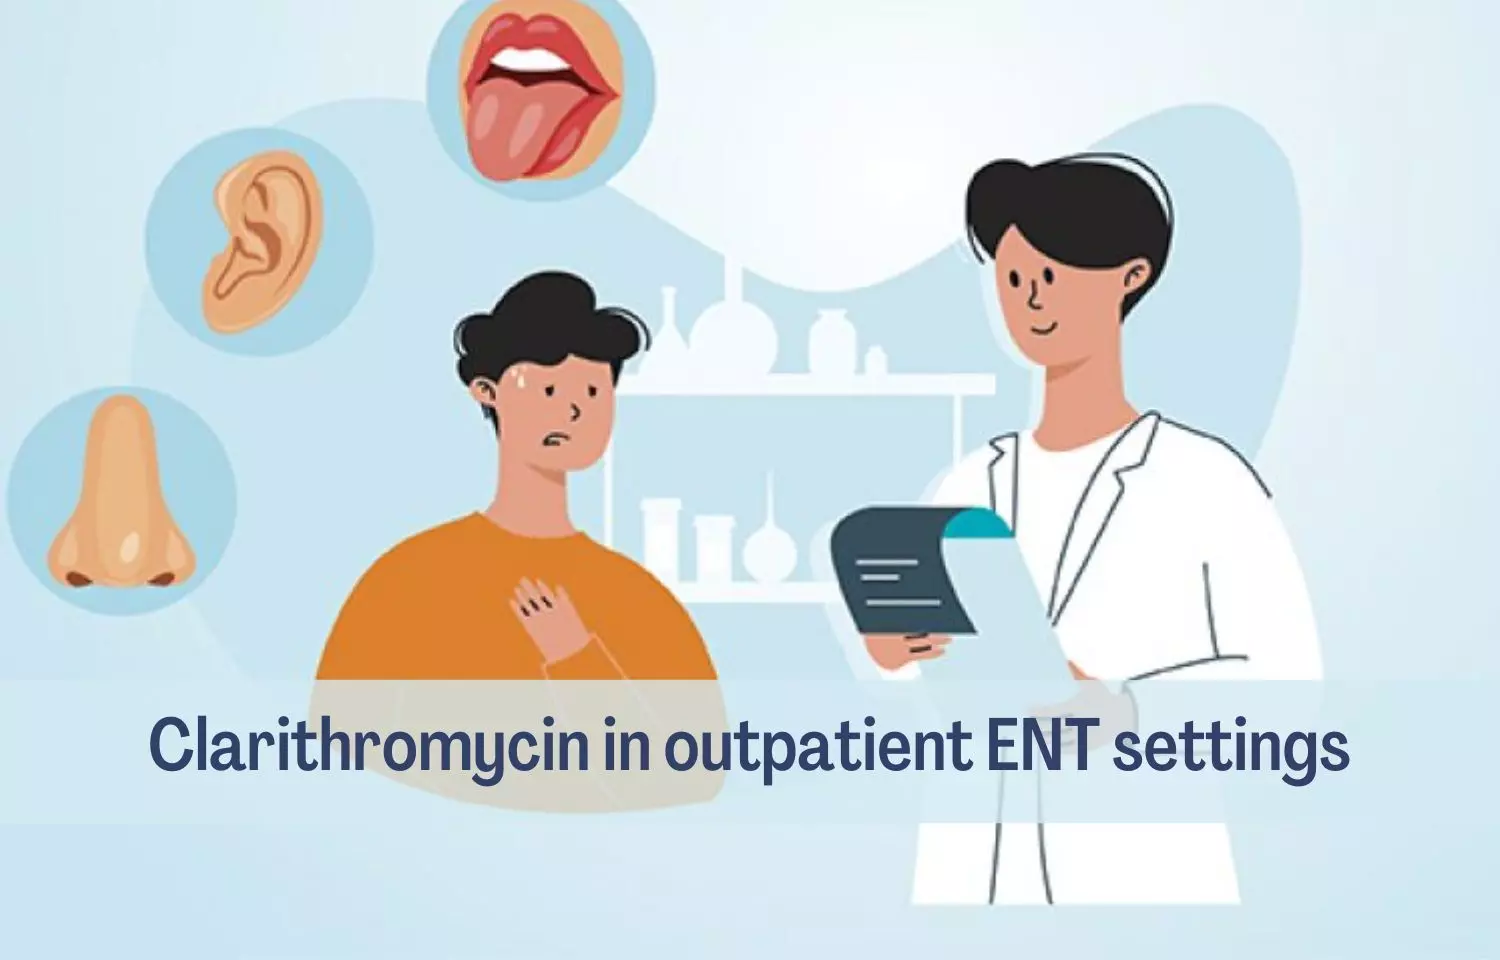 Clarithromycin in outpatient ENT settings: A Review